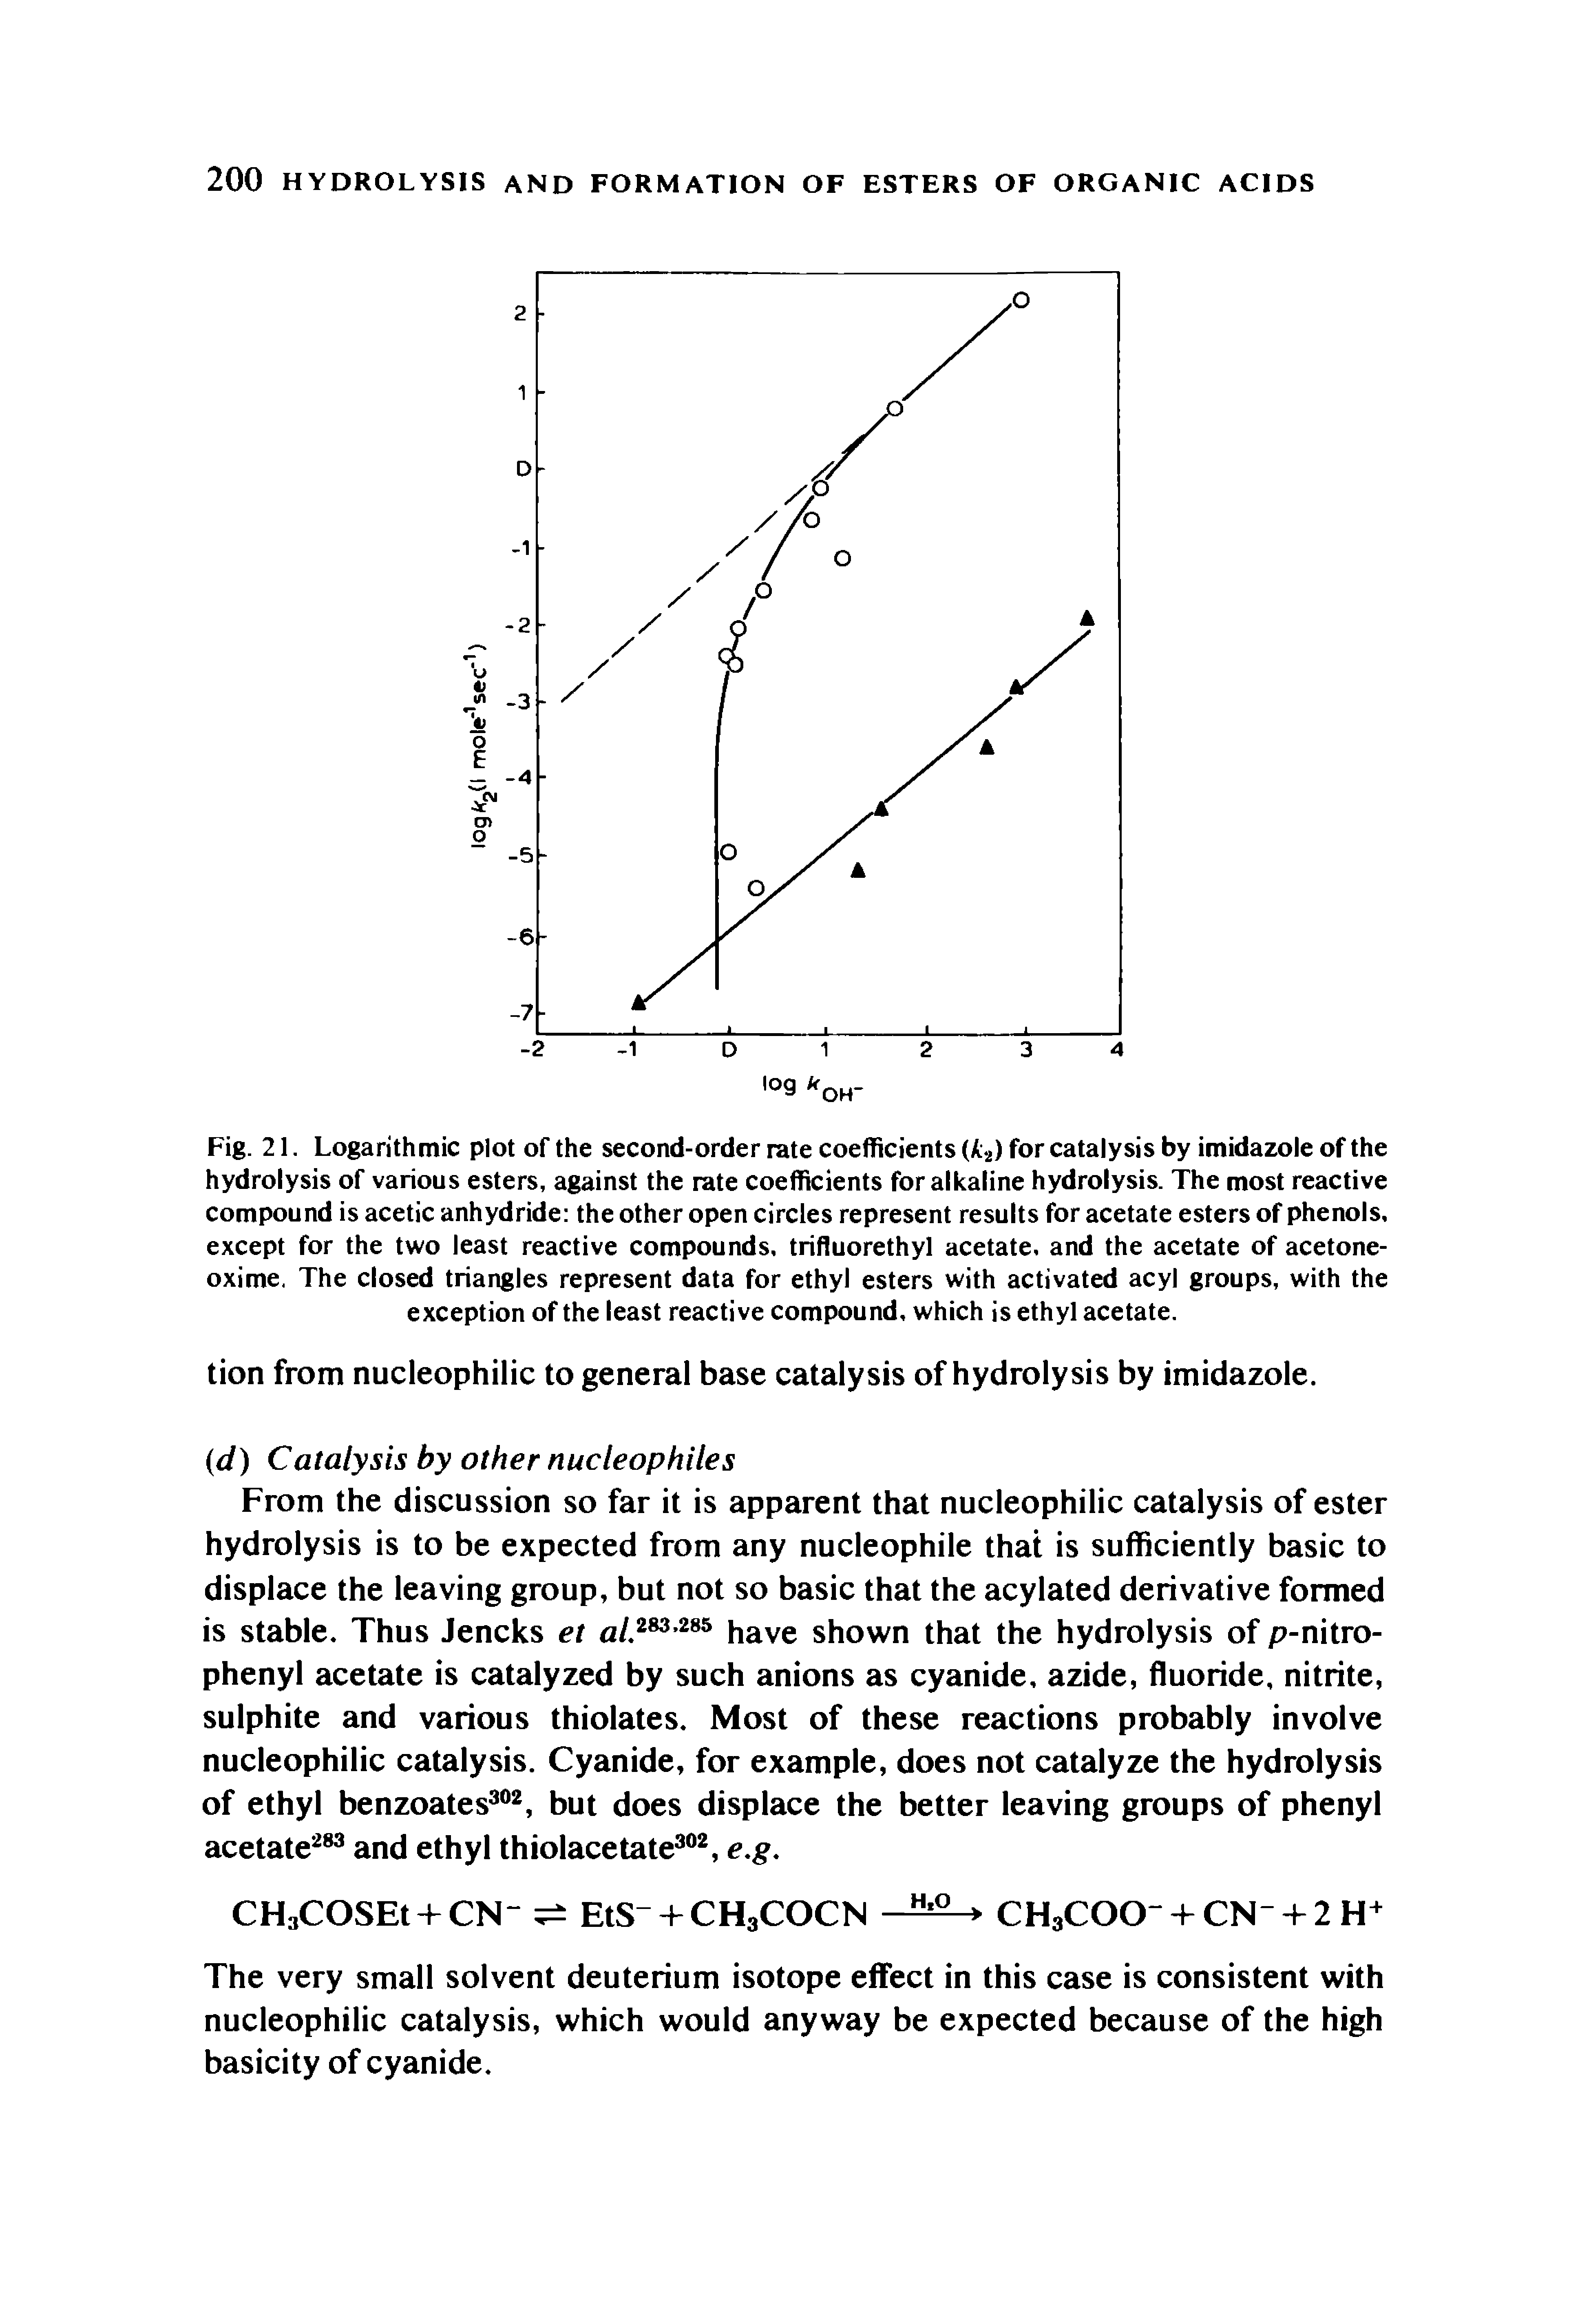 Fig. 21. Logarithmic plot of the second-order rate coefficients k2) for catalysis by imidazole of the hydrolysis of various esters, against the rate coefficients for alkaline hydrolysis. The most reactive compound is acetic anhydride the other open circles represent results for acetate esters of phenols, except for the two least reactive compounds, trifluorethyl acetate, and the acetate of acetone-oxime. The closed triangles represent data for ethyl esters with activated acyl groups, with the exception of the least reactive compound, which is ethyl acetate.